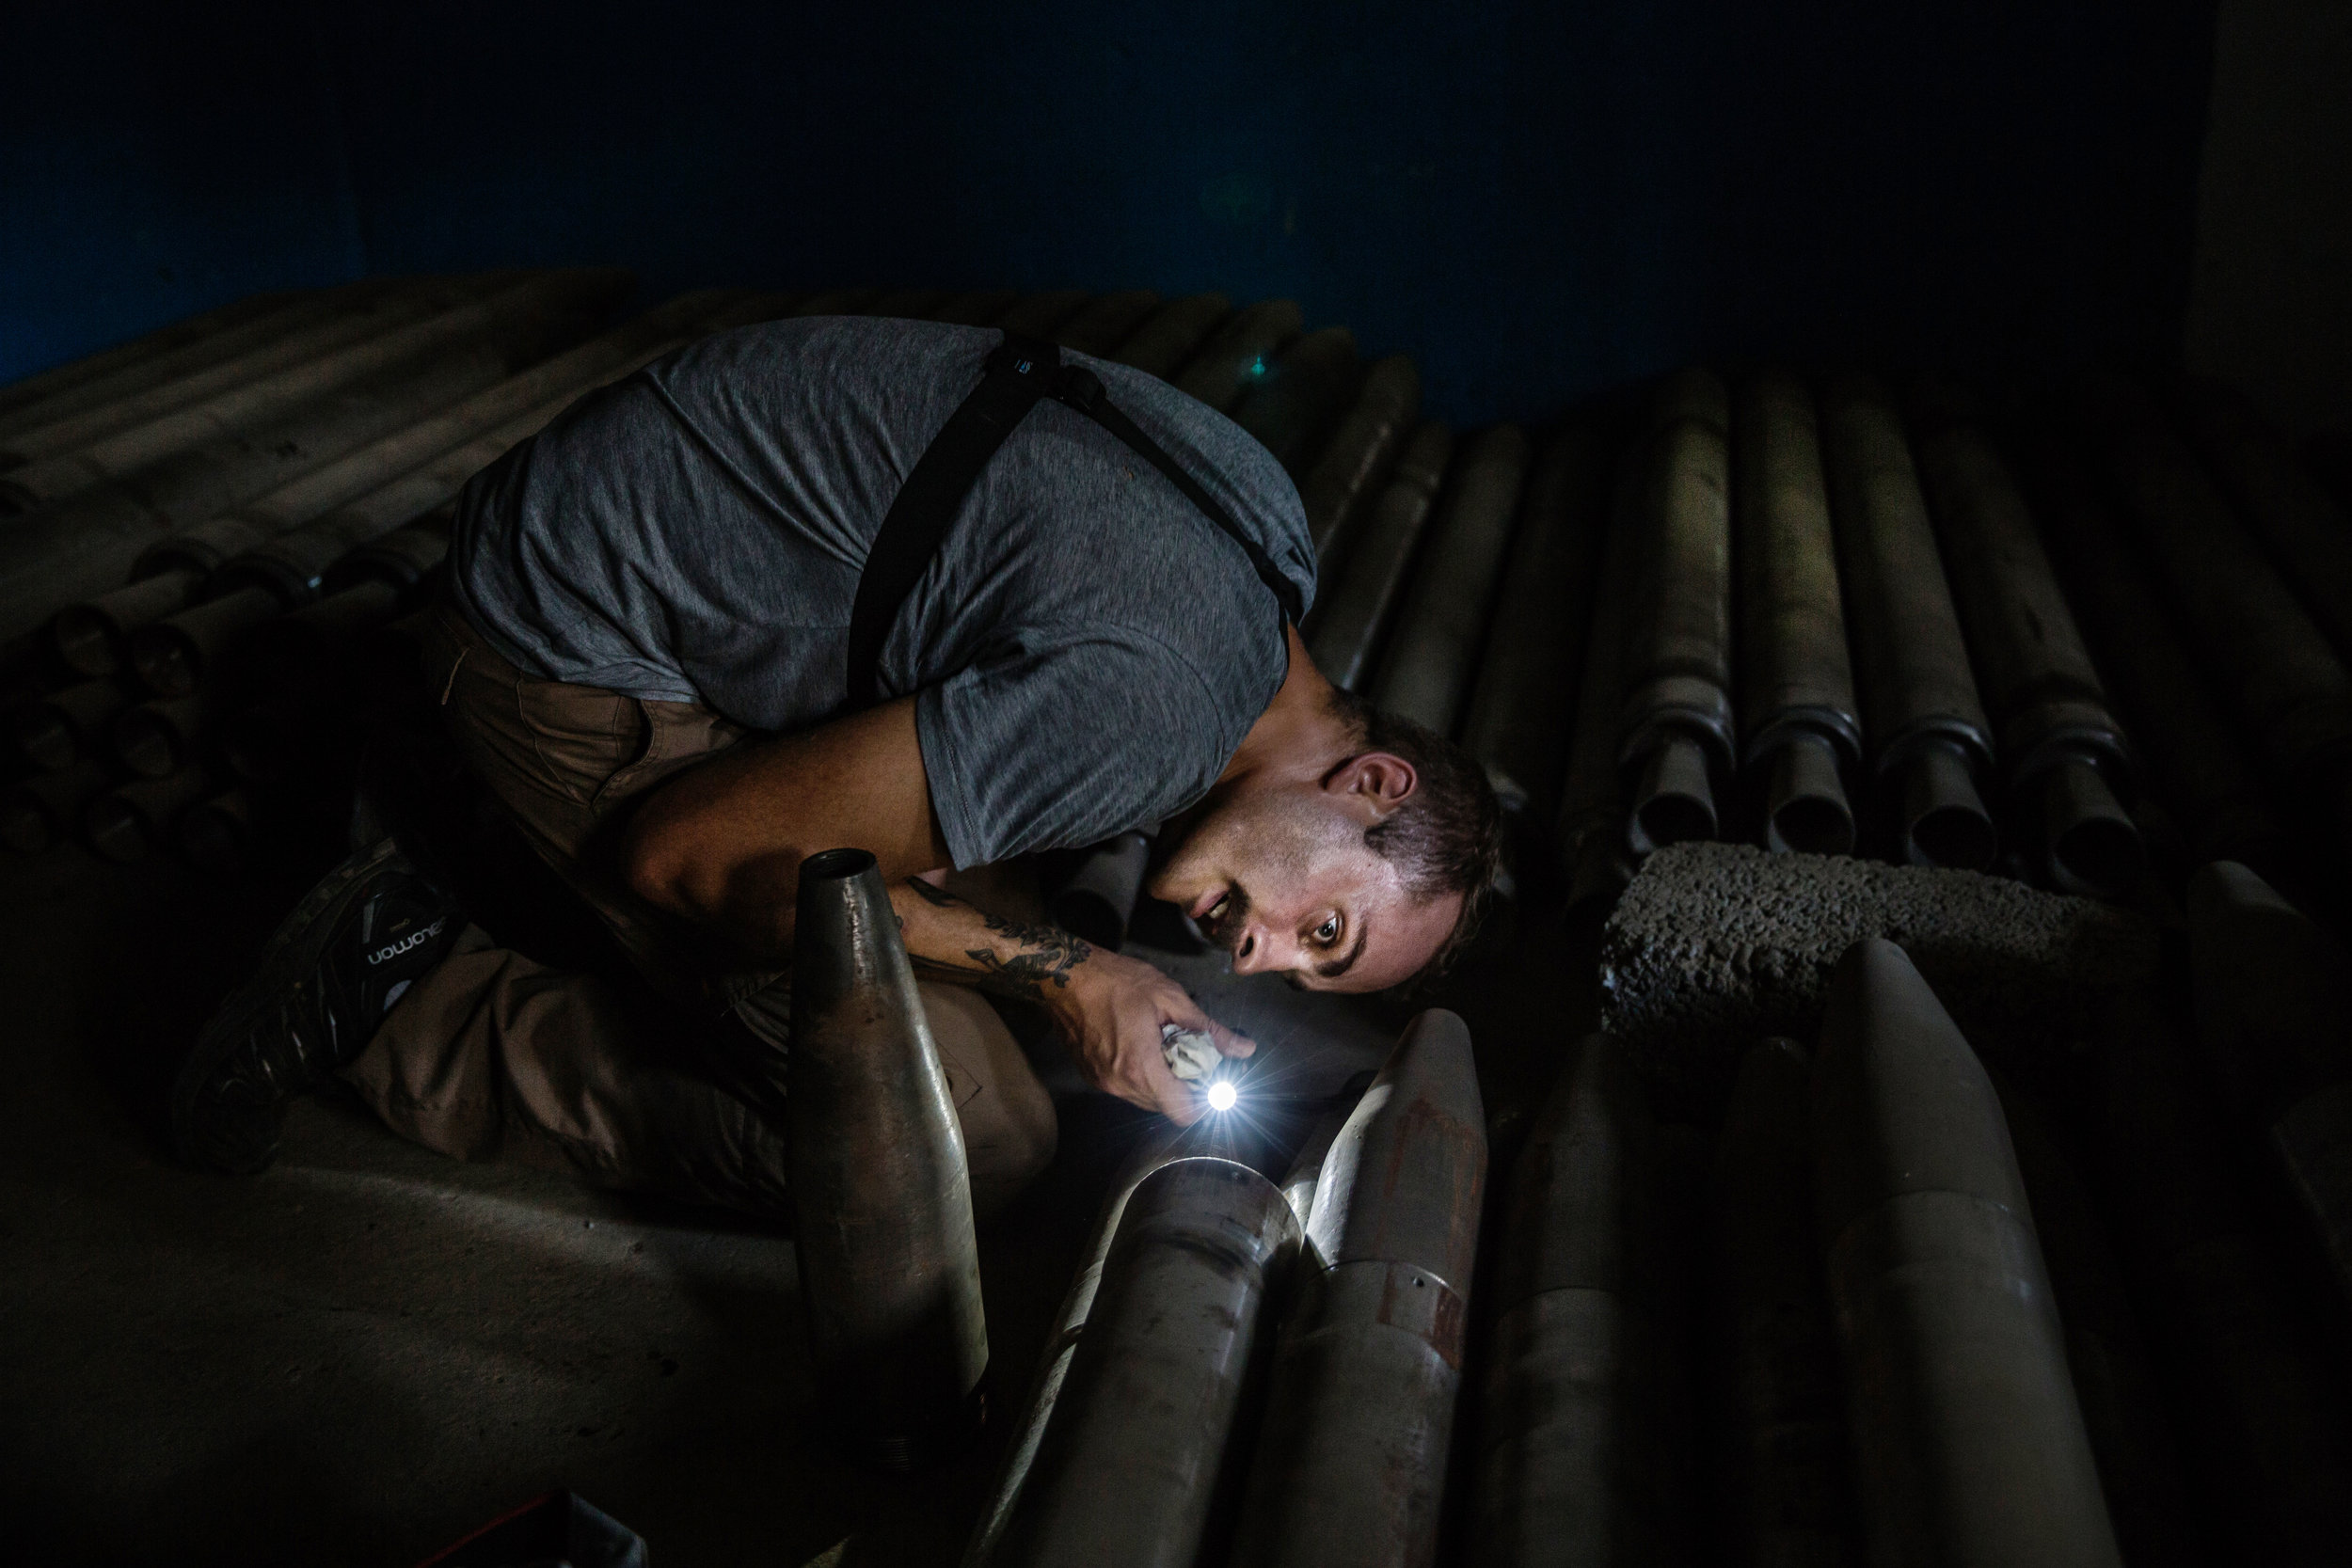  Weapons investigator Damien Spleeters of the organization Conflict Arms Research examines the inside of one of the many Islamic State-manufactured rockets found inside a family home-turned-weapons-warehouse in Tal Afar, northern Iraq. ISIS’ network 